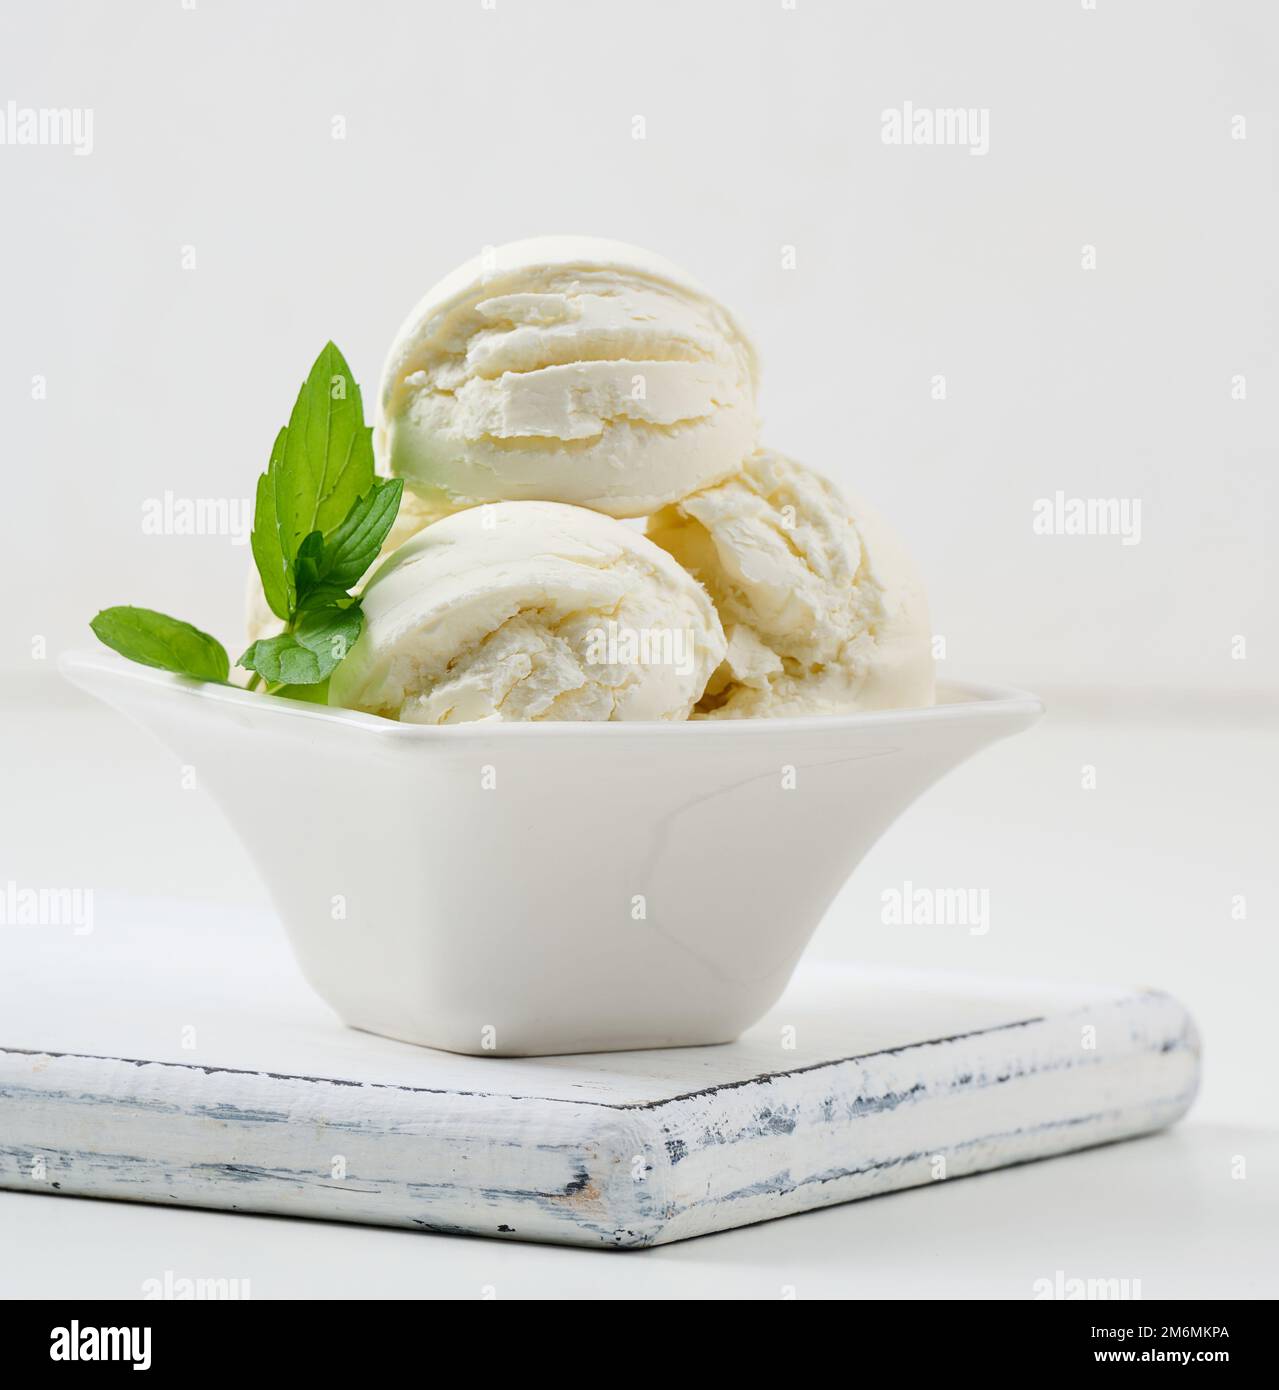 Vanilla ice cream balls with green mint leaf in a white ceramic plate Stock Photo